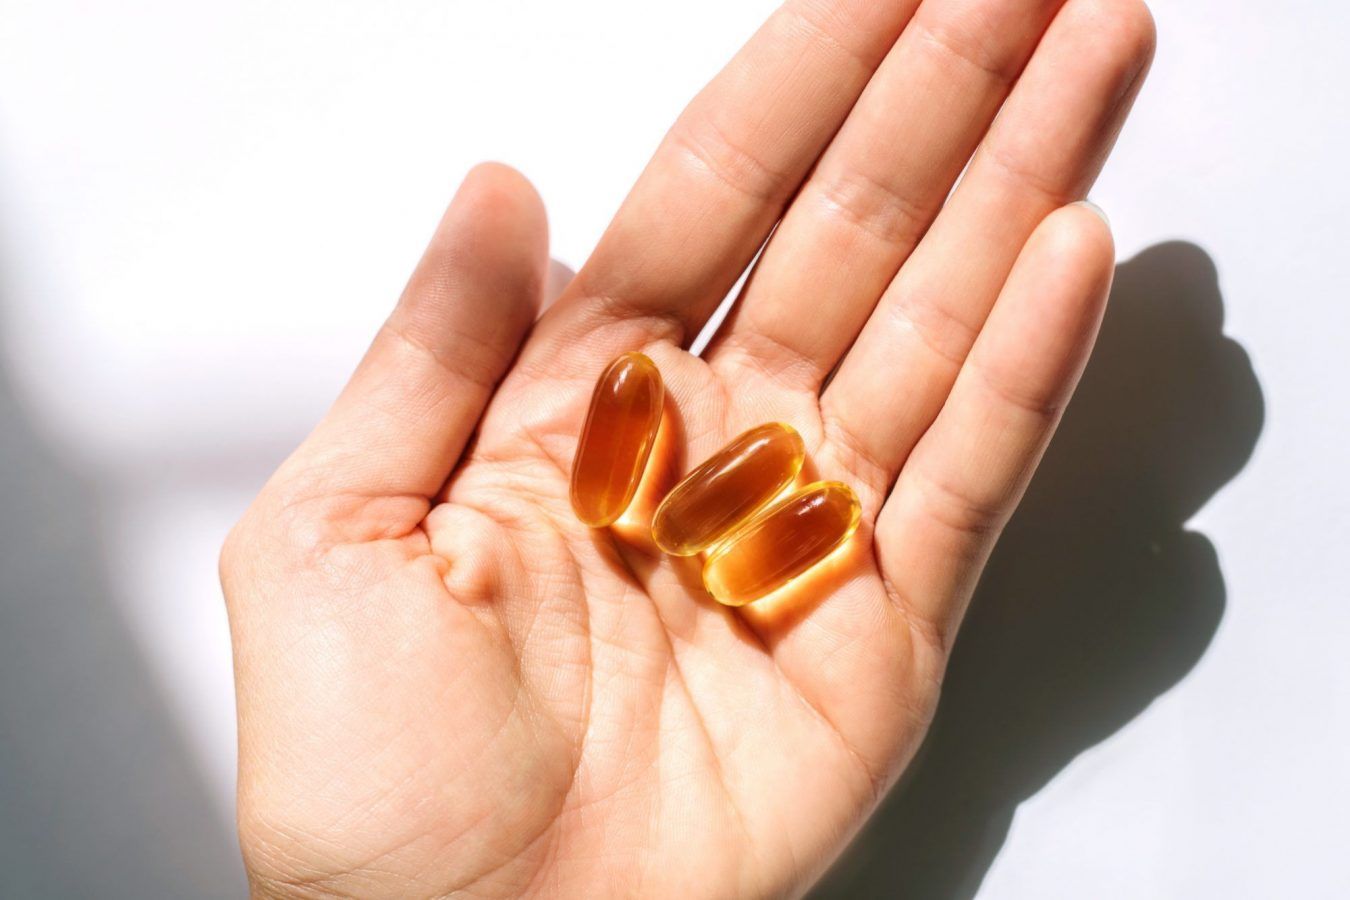 You might not need a daily vitamin D supplement after all, new research shows